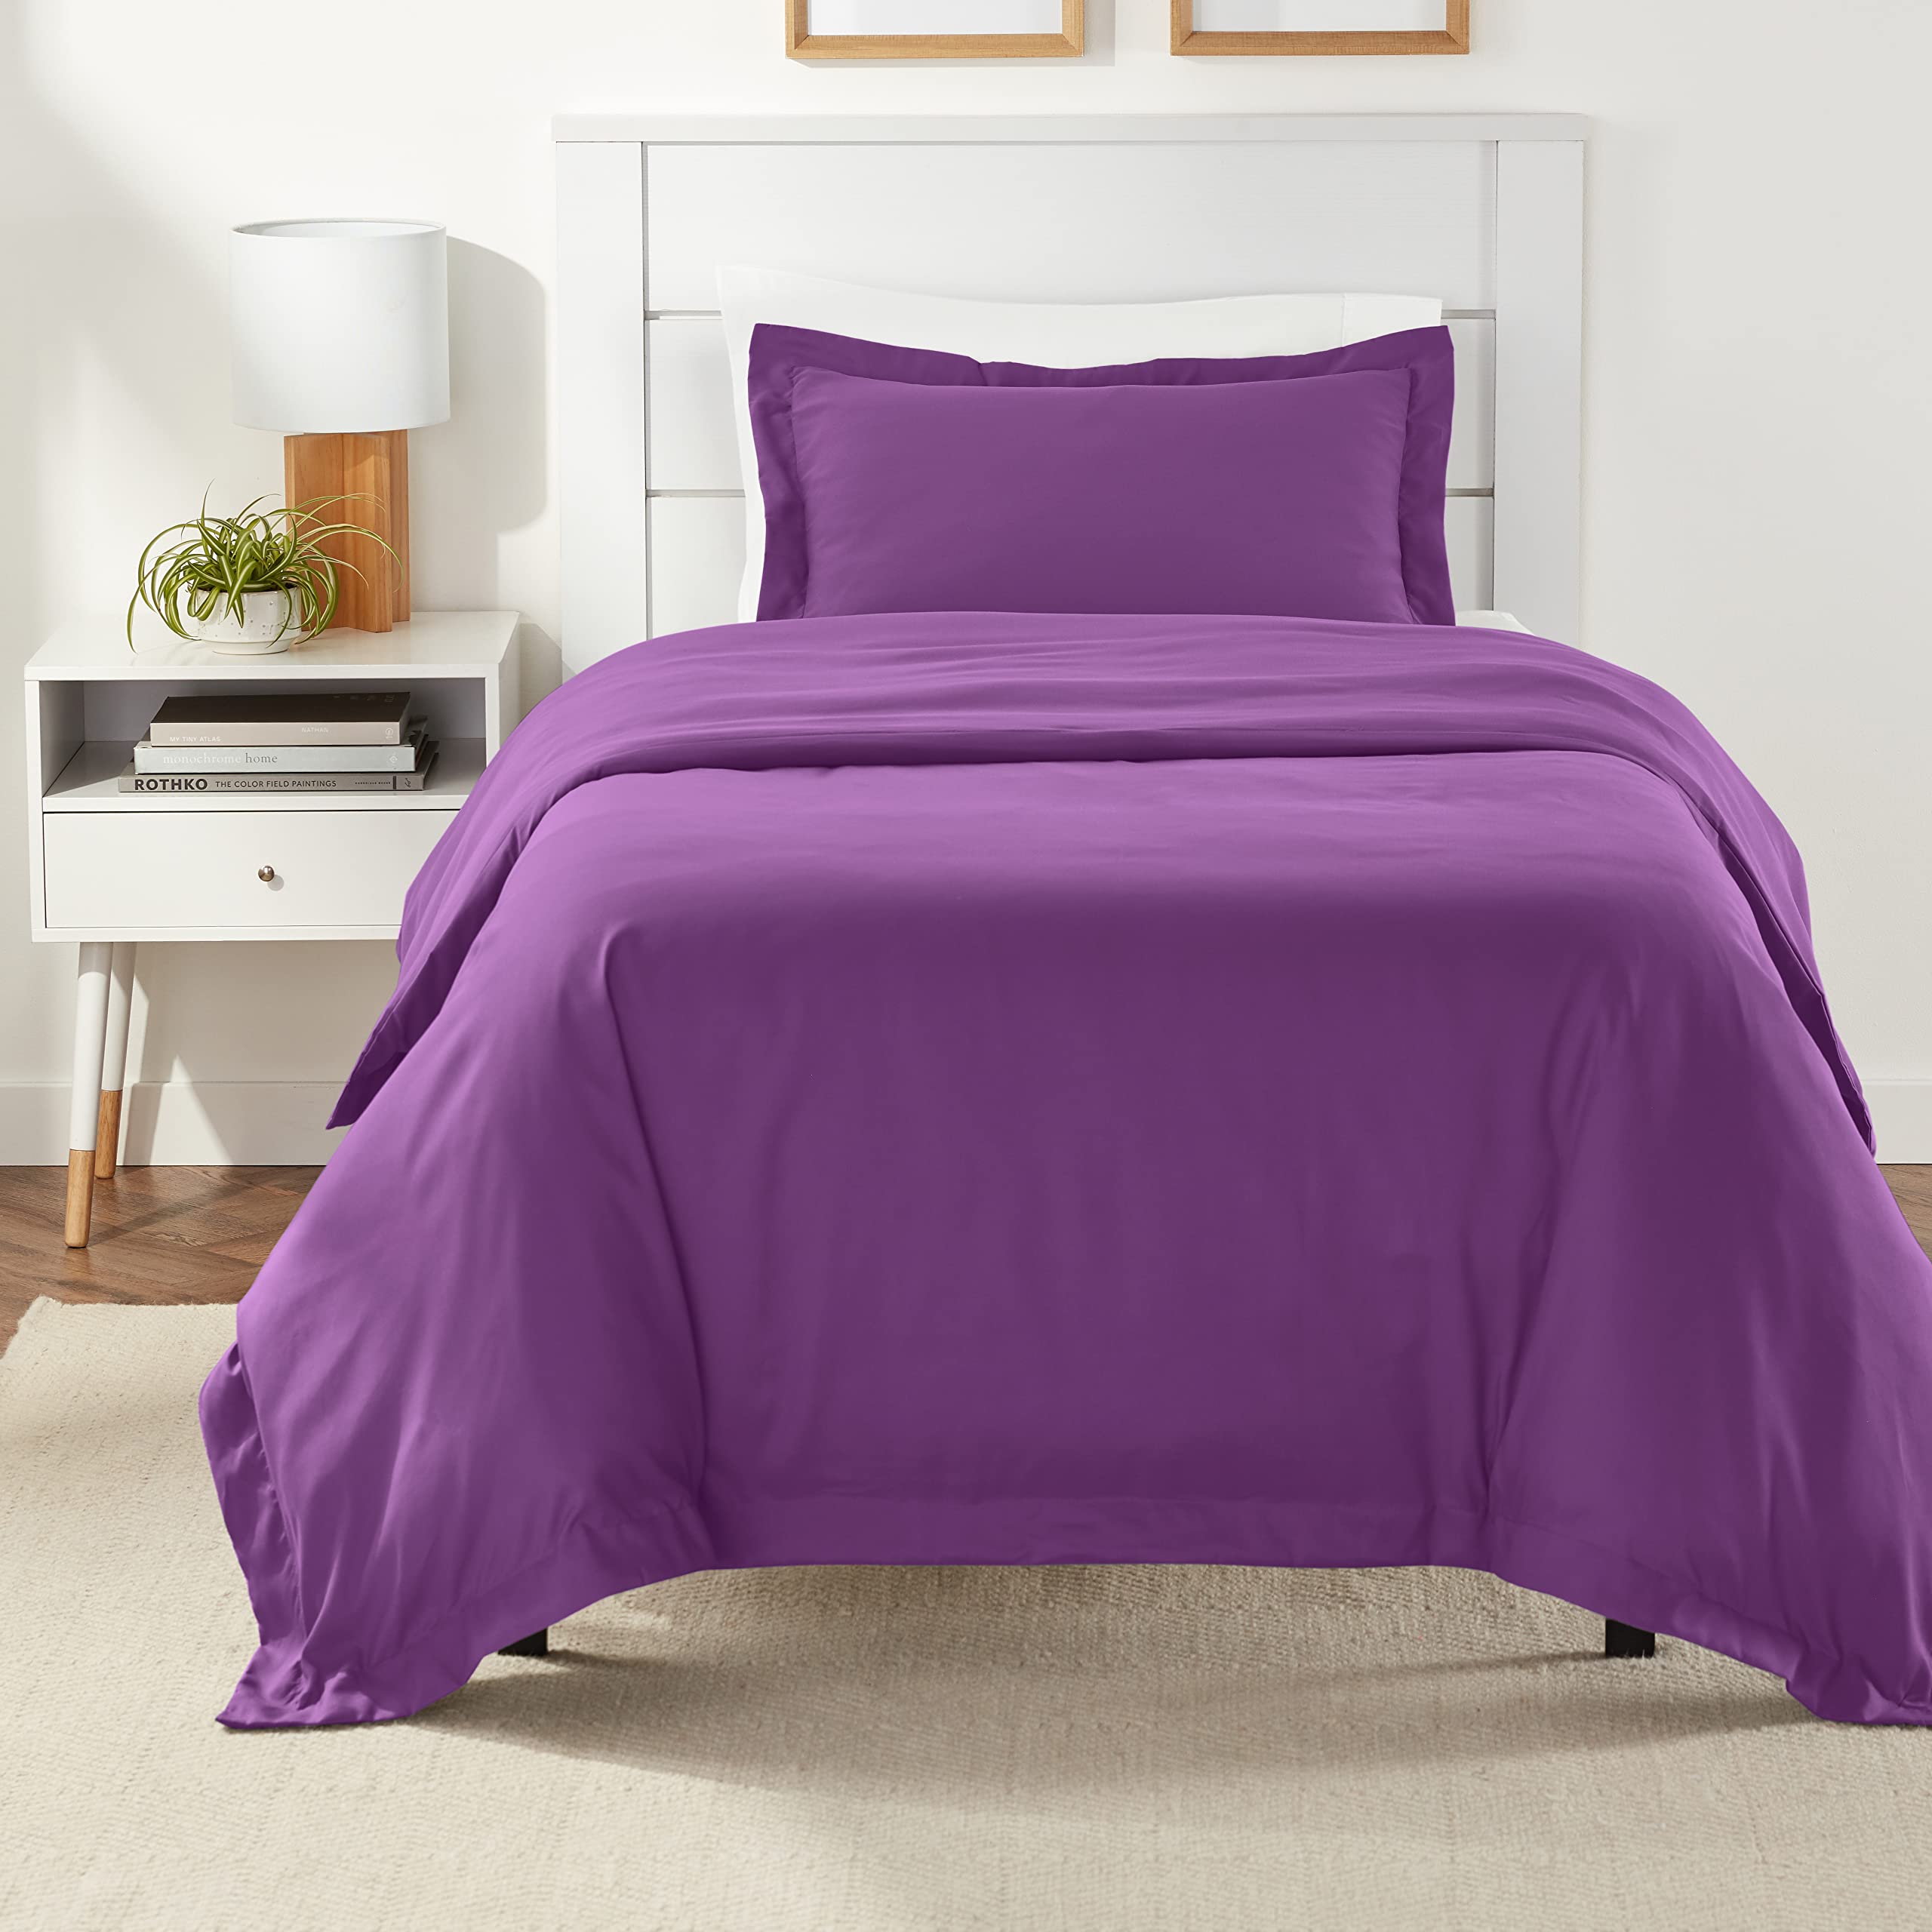 Book Cover Amazon Basics Lightweight Microfiber Duvet Cover Set with Snap Buttons, Twin/Twin XL, Plum Plum Twin/Twin XL Snap Buttons